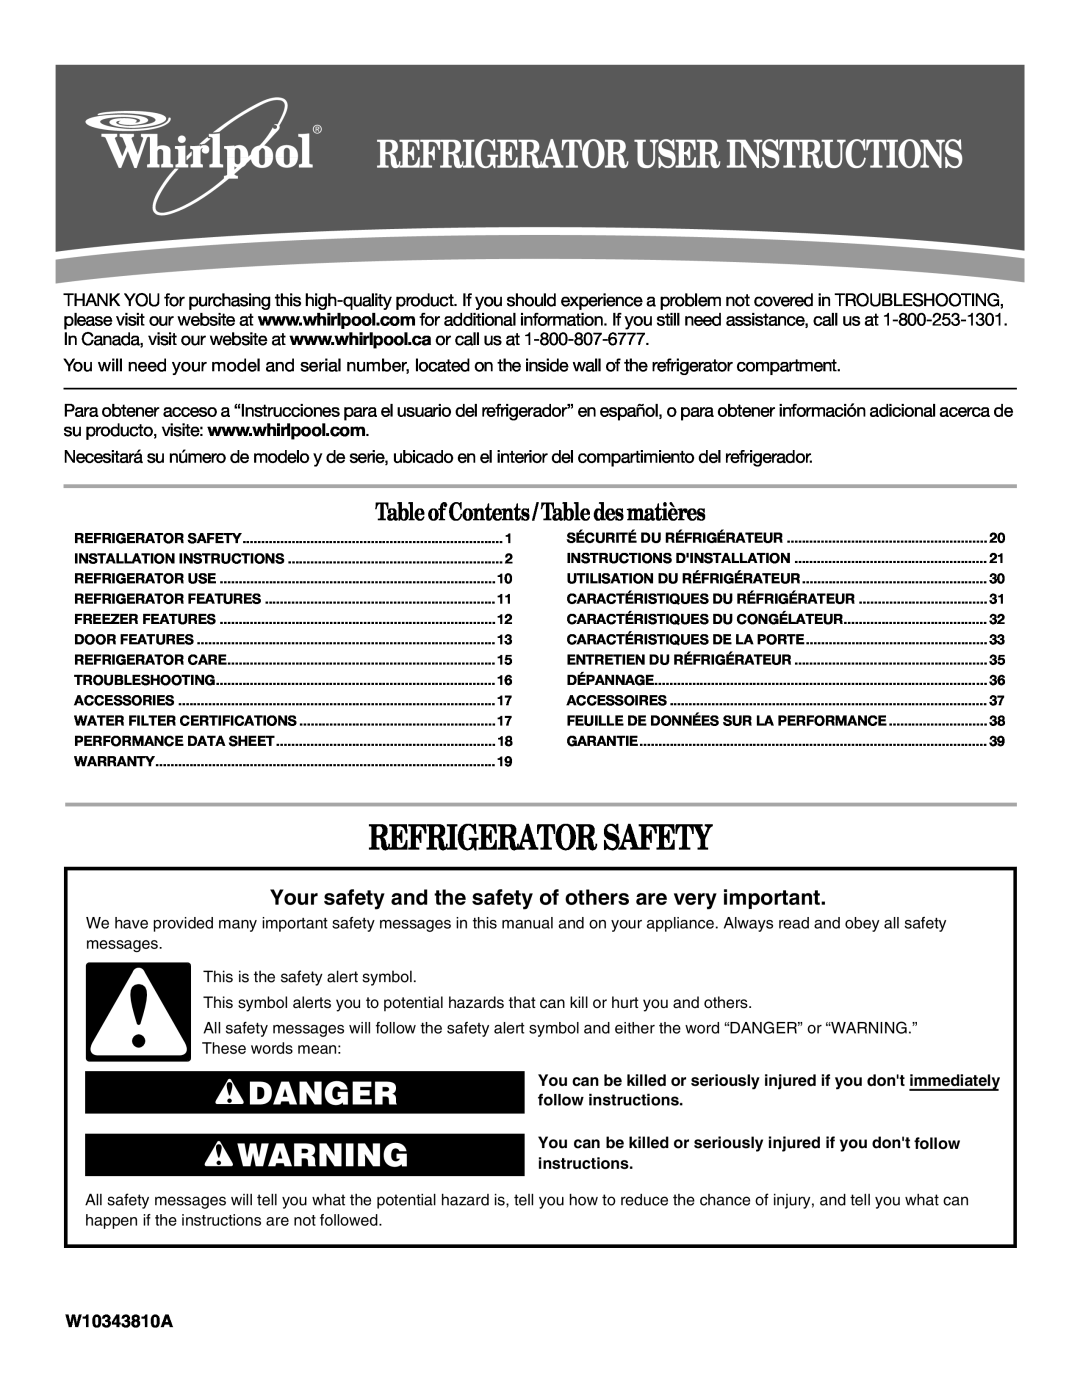 Whirlpool W10343810A installation instructions Refrigerator Safety, Danger, Table of Contents / Table des matières 